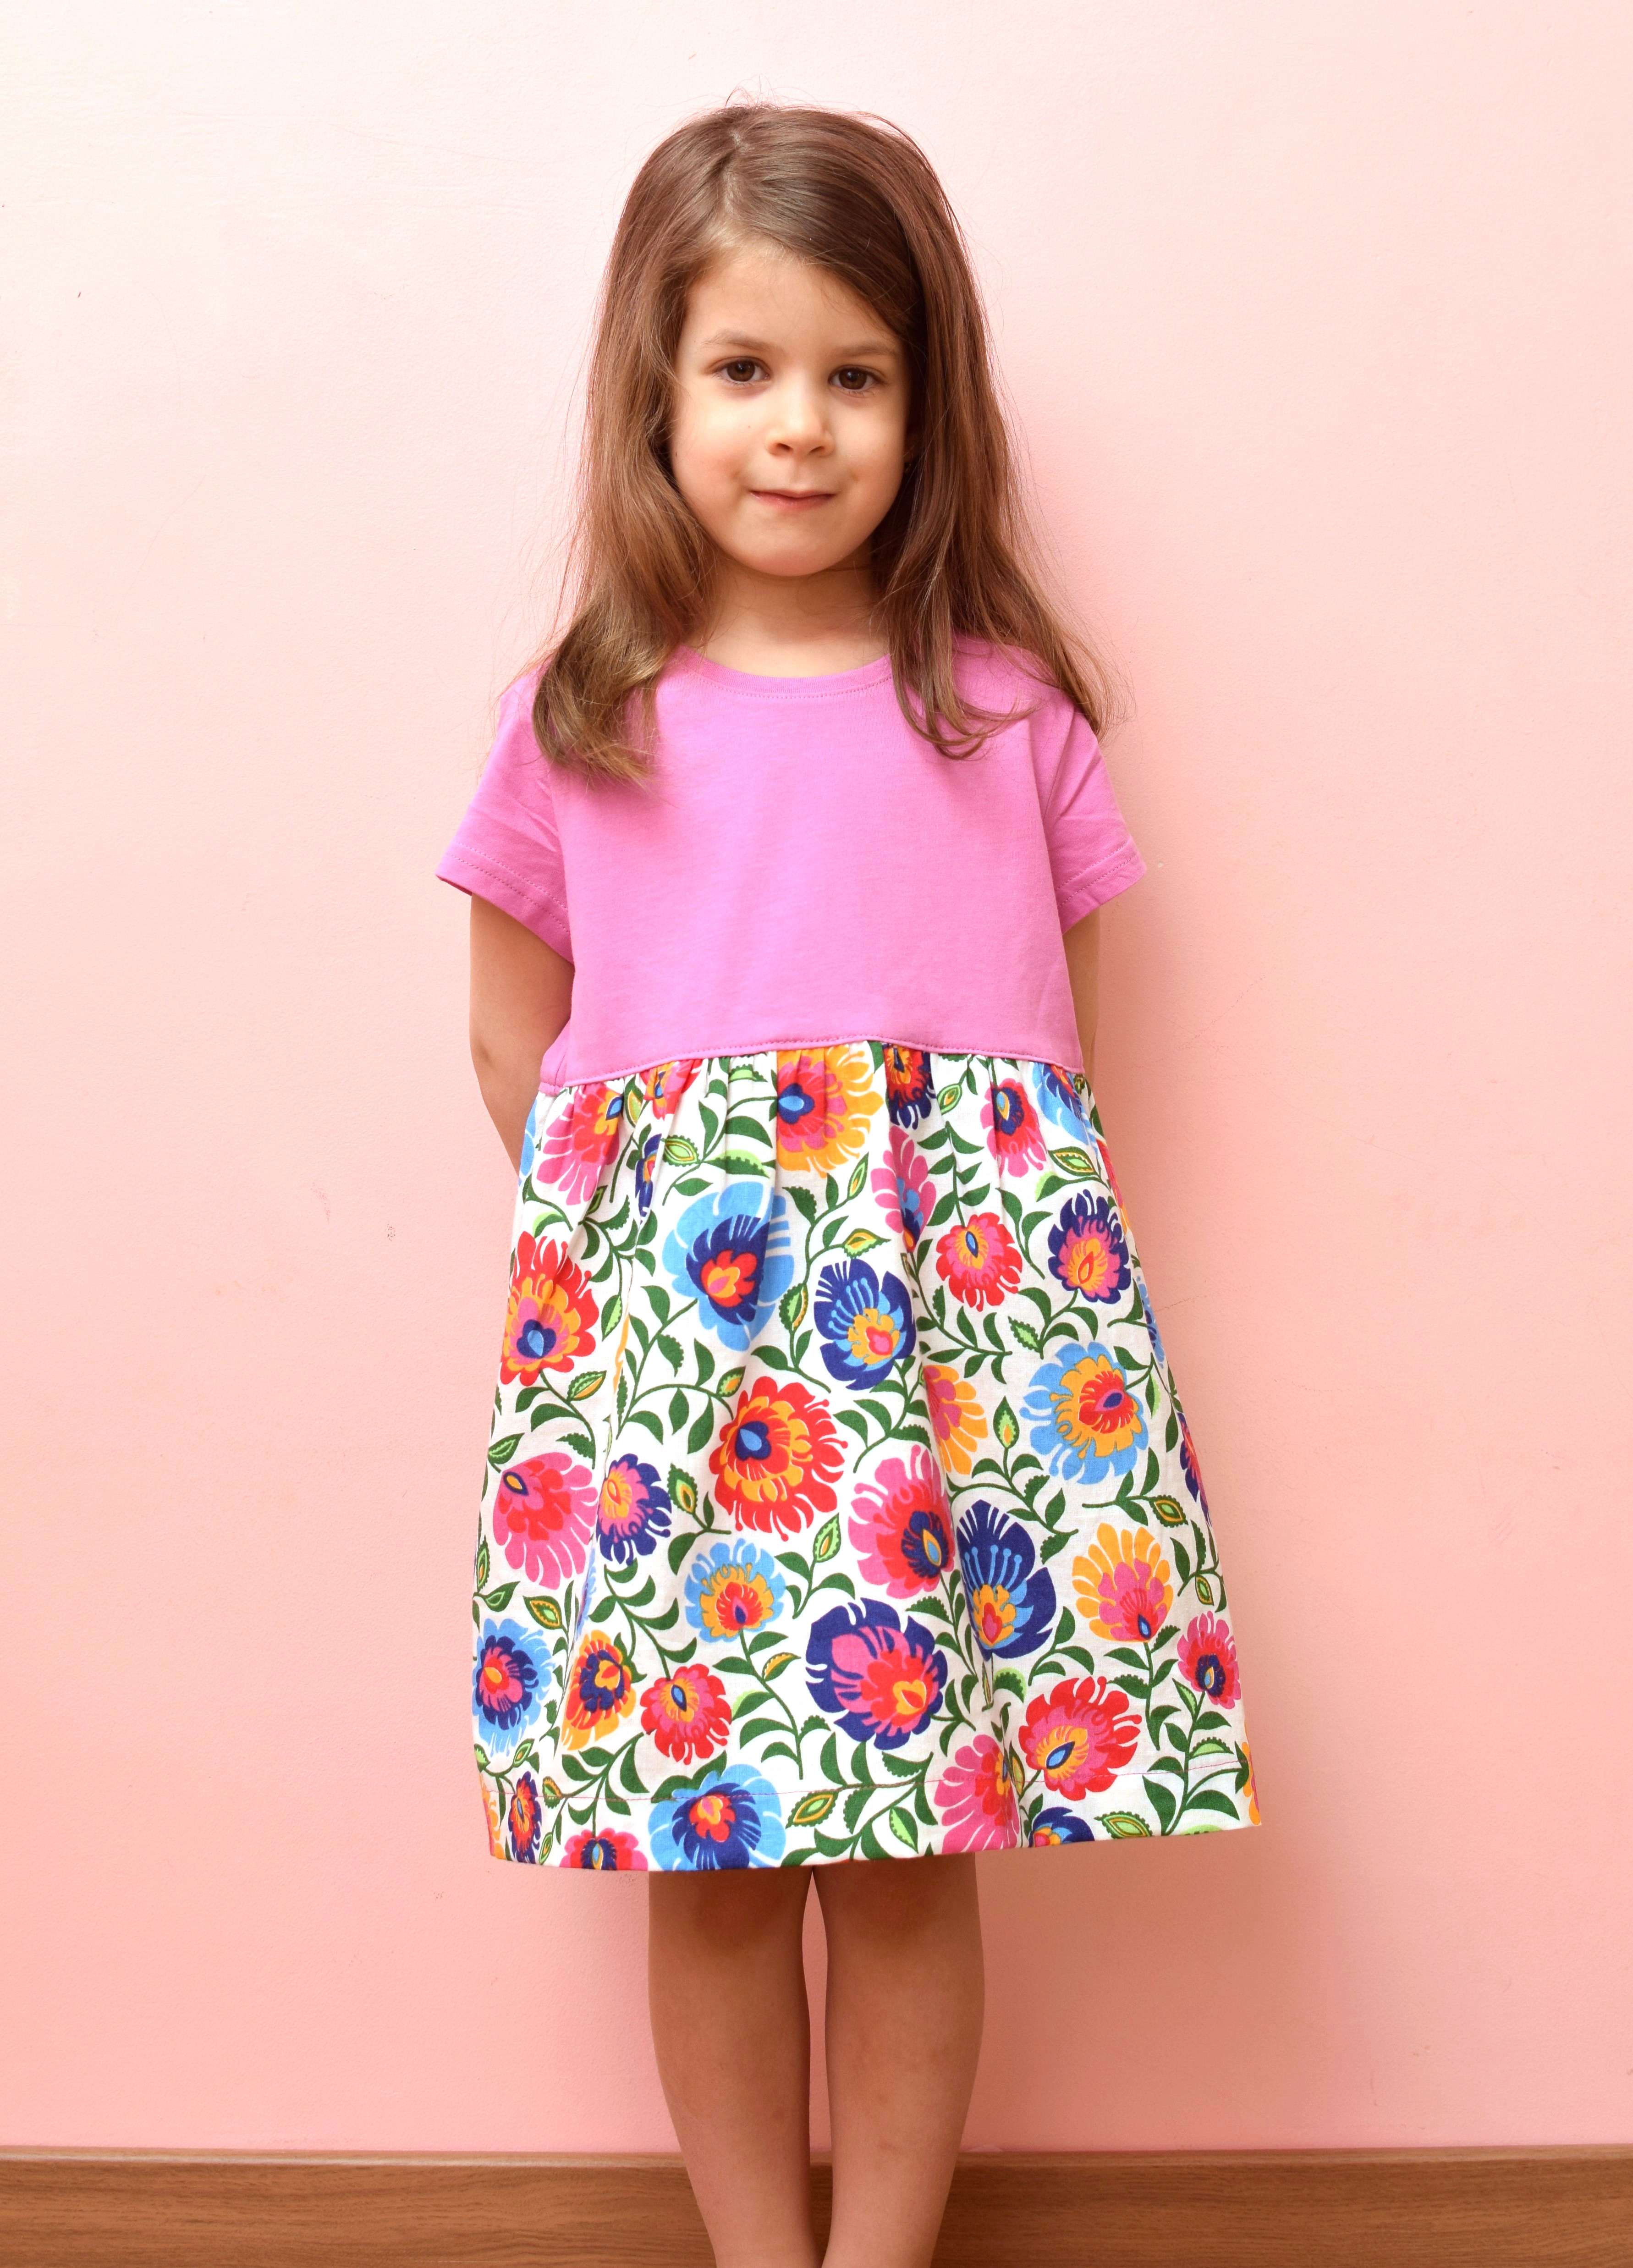 Indigo Girl Kid Halter Top and Long Skirt | Custom Gowns | Made To Ord